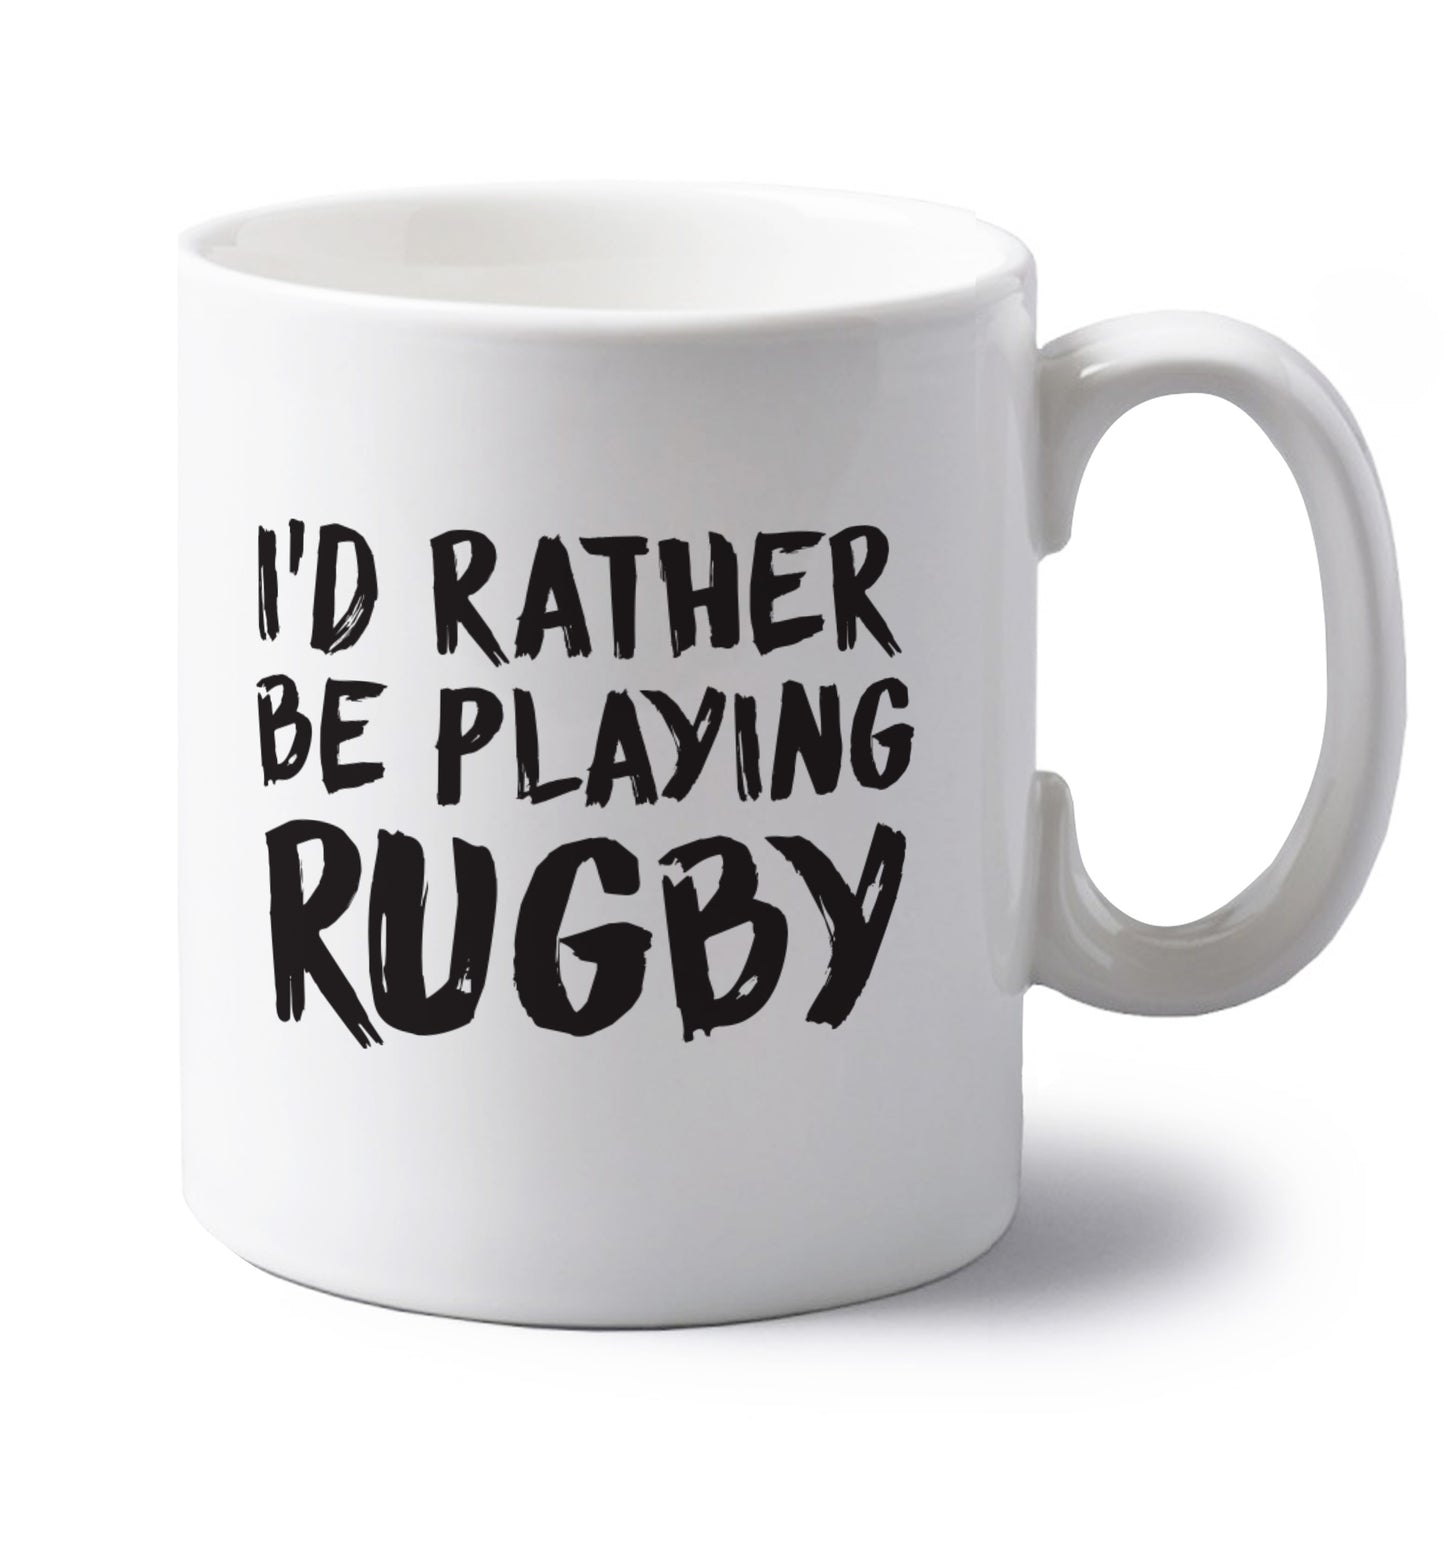 I'd rather be playing rugby left handed white ceramic mug 